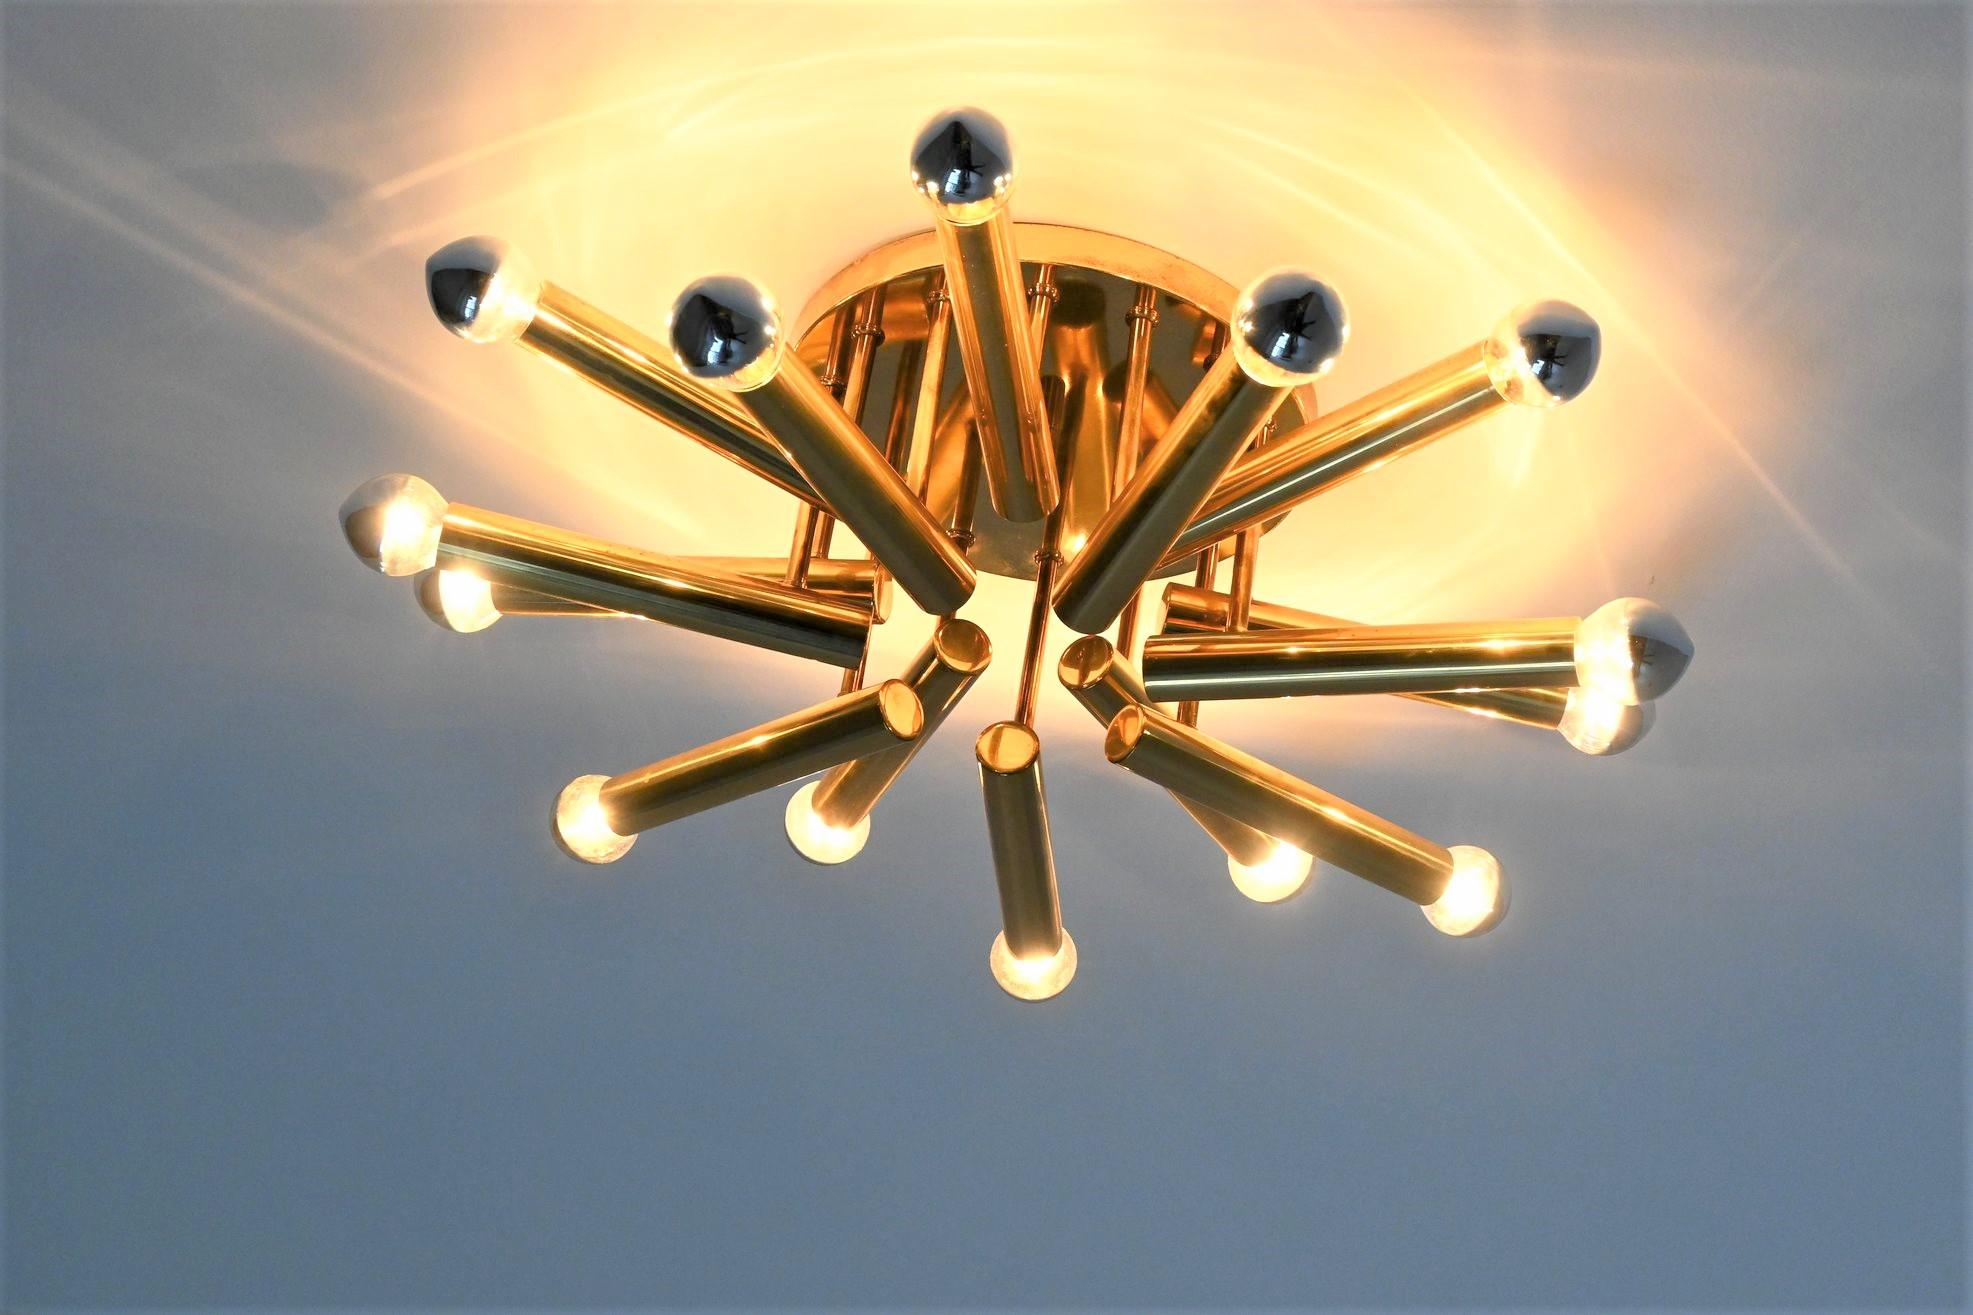 Very nice atmospheric flushmount ceiling lamp designed by Gaetano Sciolari for Boulanger, Italy, 1960. This Regency style small ceiling lamp has 14 brass tubes with different lengths connected with thin tubes to a round brass plate. It brings a